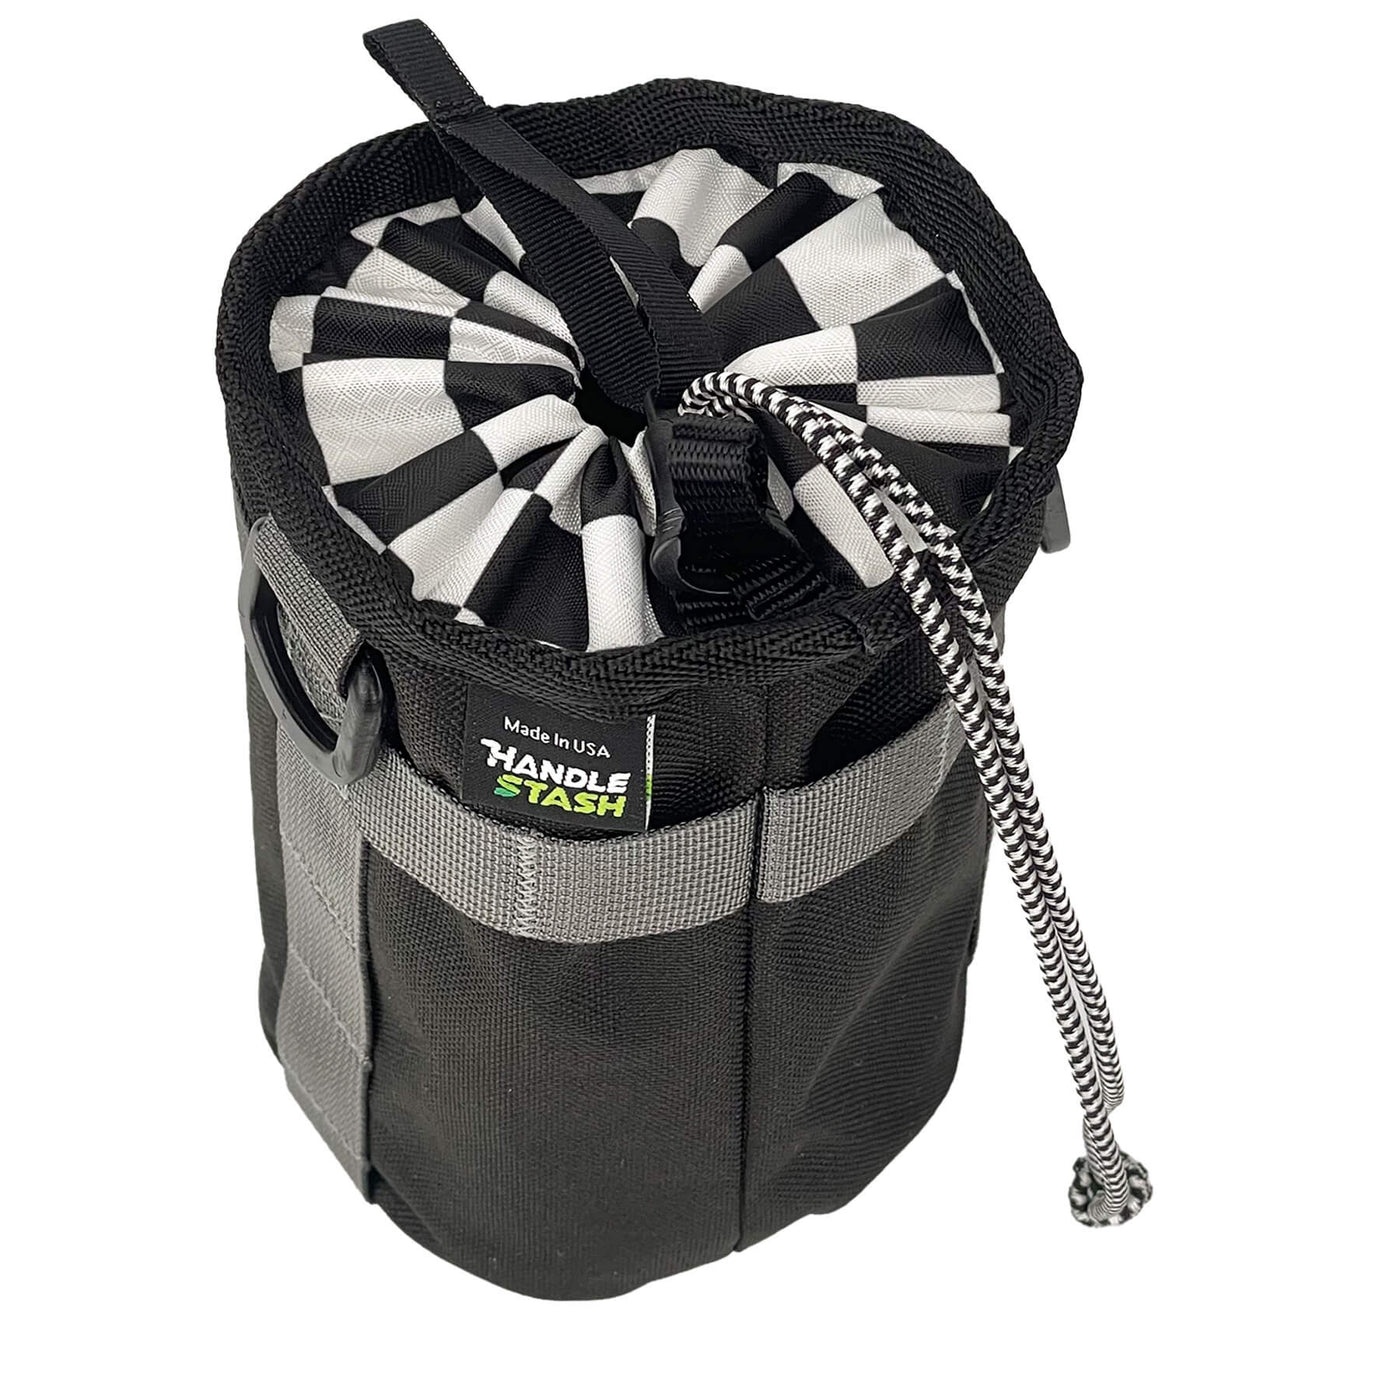 Black stem bag with two-tone liner cinched closed.